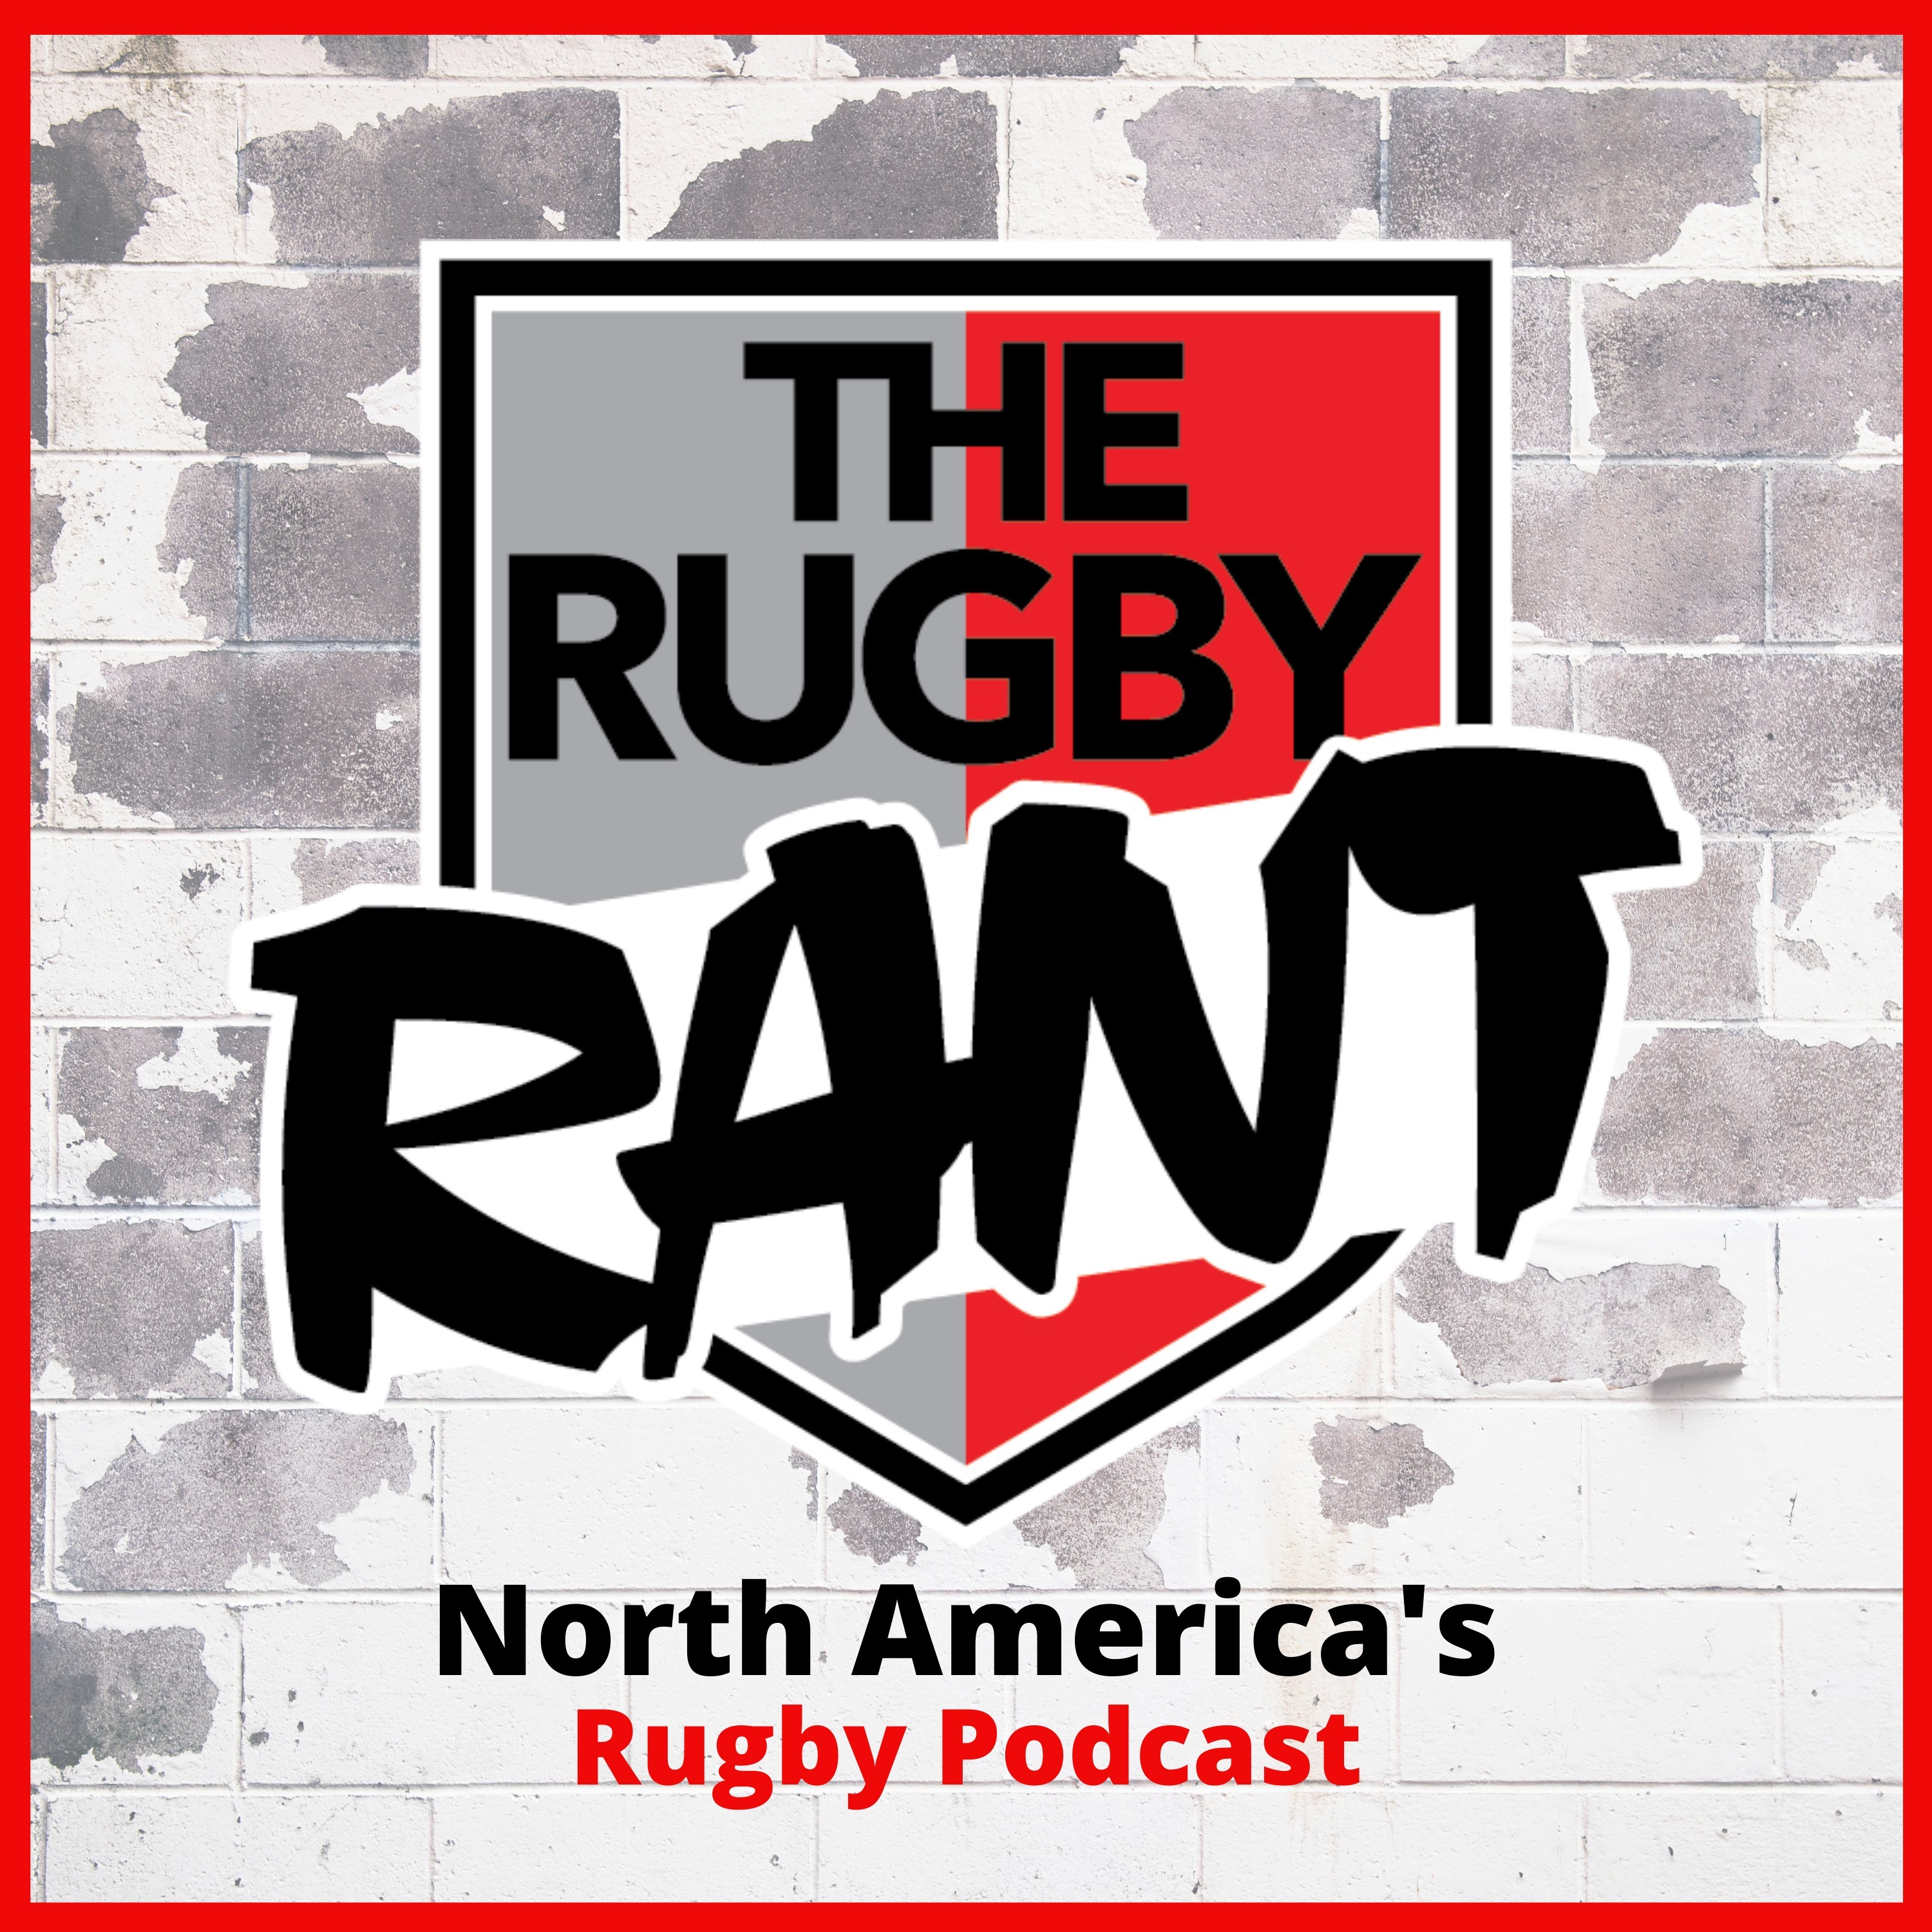 The Rugby Rant - Run, Pass or Kick with DTH van der Merwe